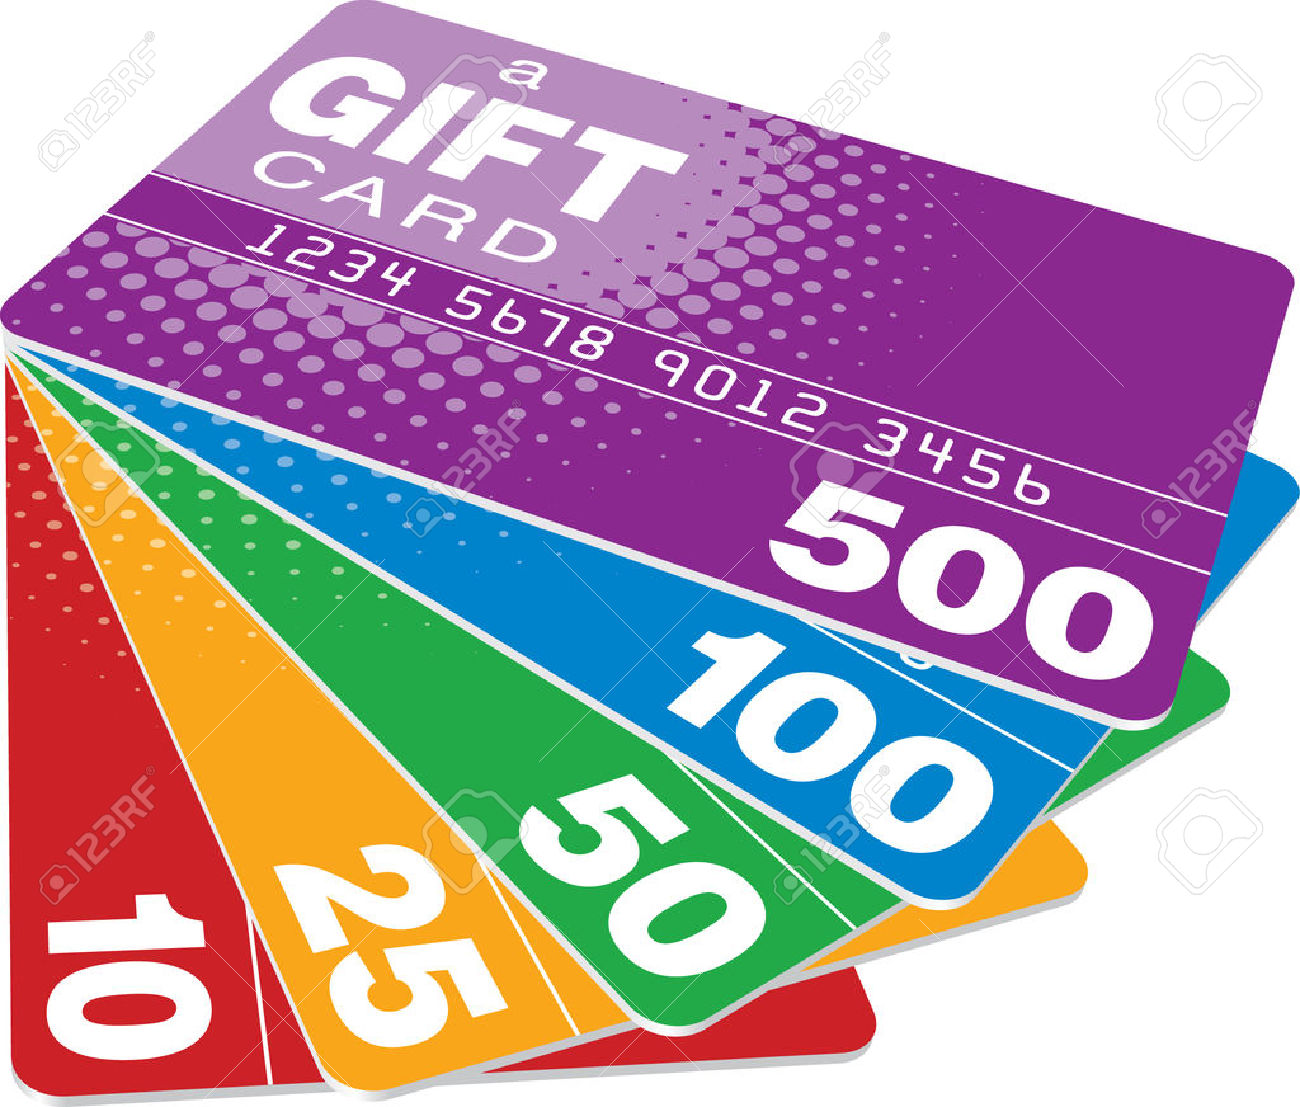 Free Gift Card Cliparts, Download Free Clip Art, Free Clip.